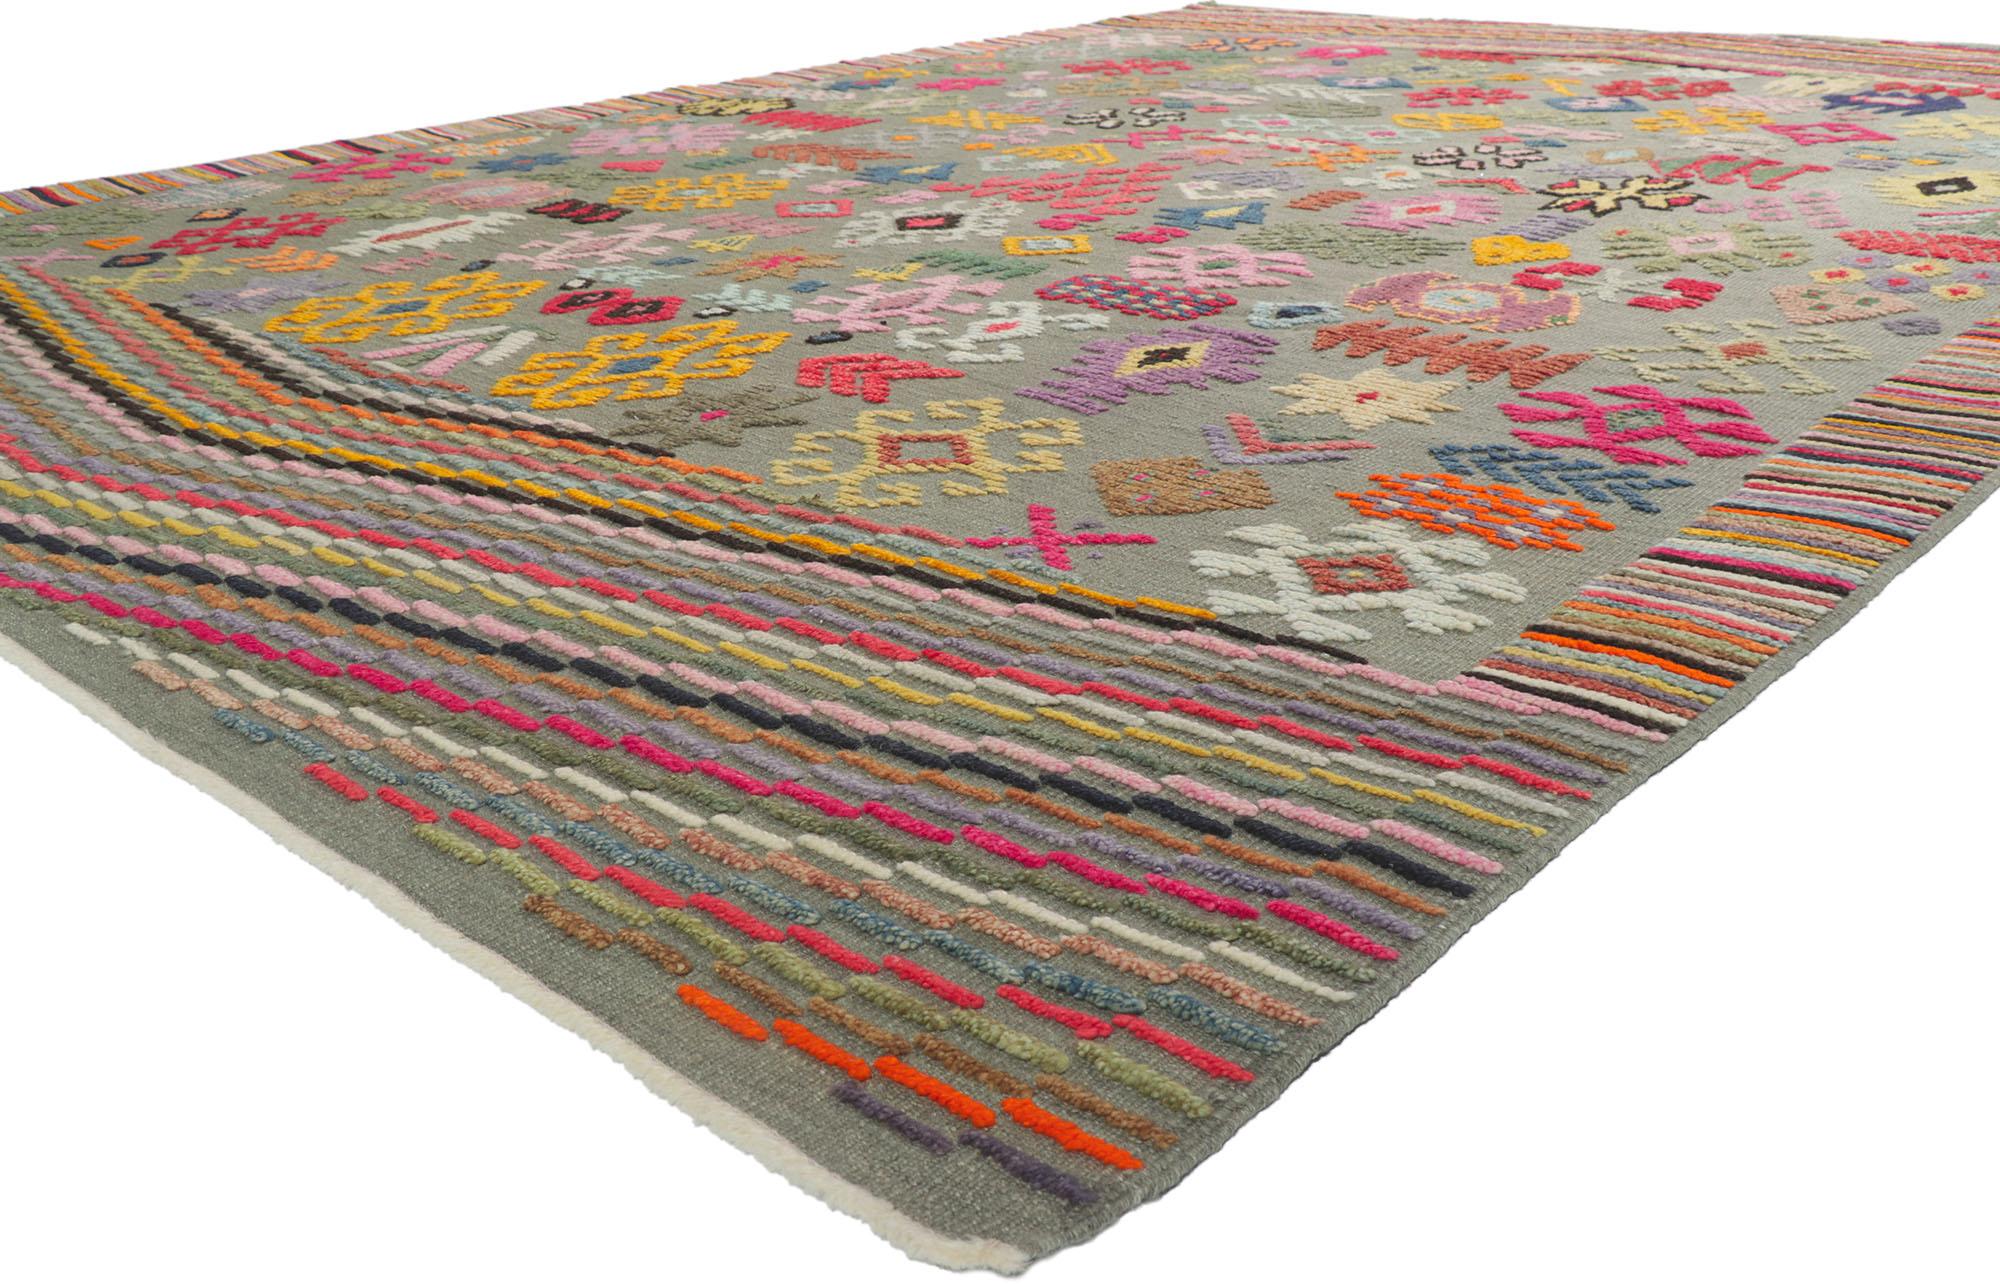 53784 Modern High-Low Turkish Rug, 10'02 x 14'04. Maximalist design meets bohemian style in this handwoven wool modern high-low Turkish rug, creating a dynamic and eclectic fusion that celebrates artistic freedom, self-expression, and a love for